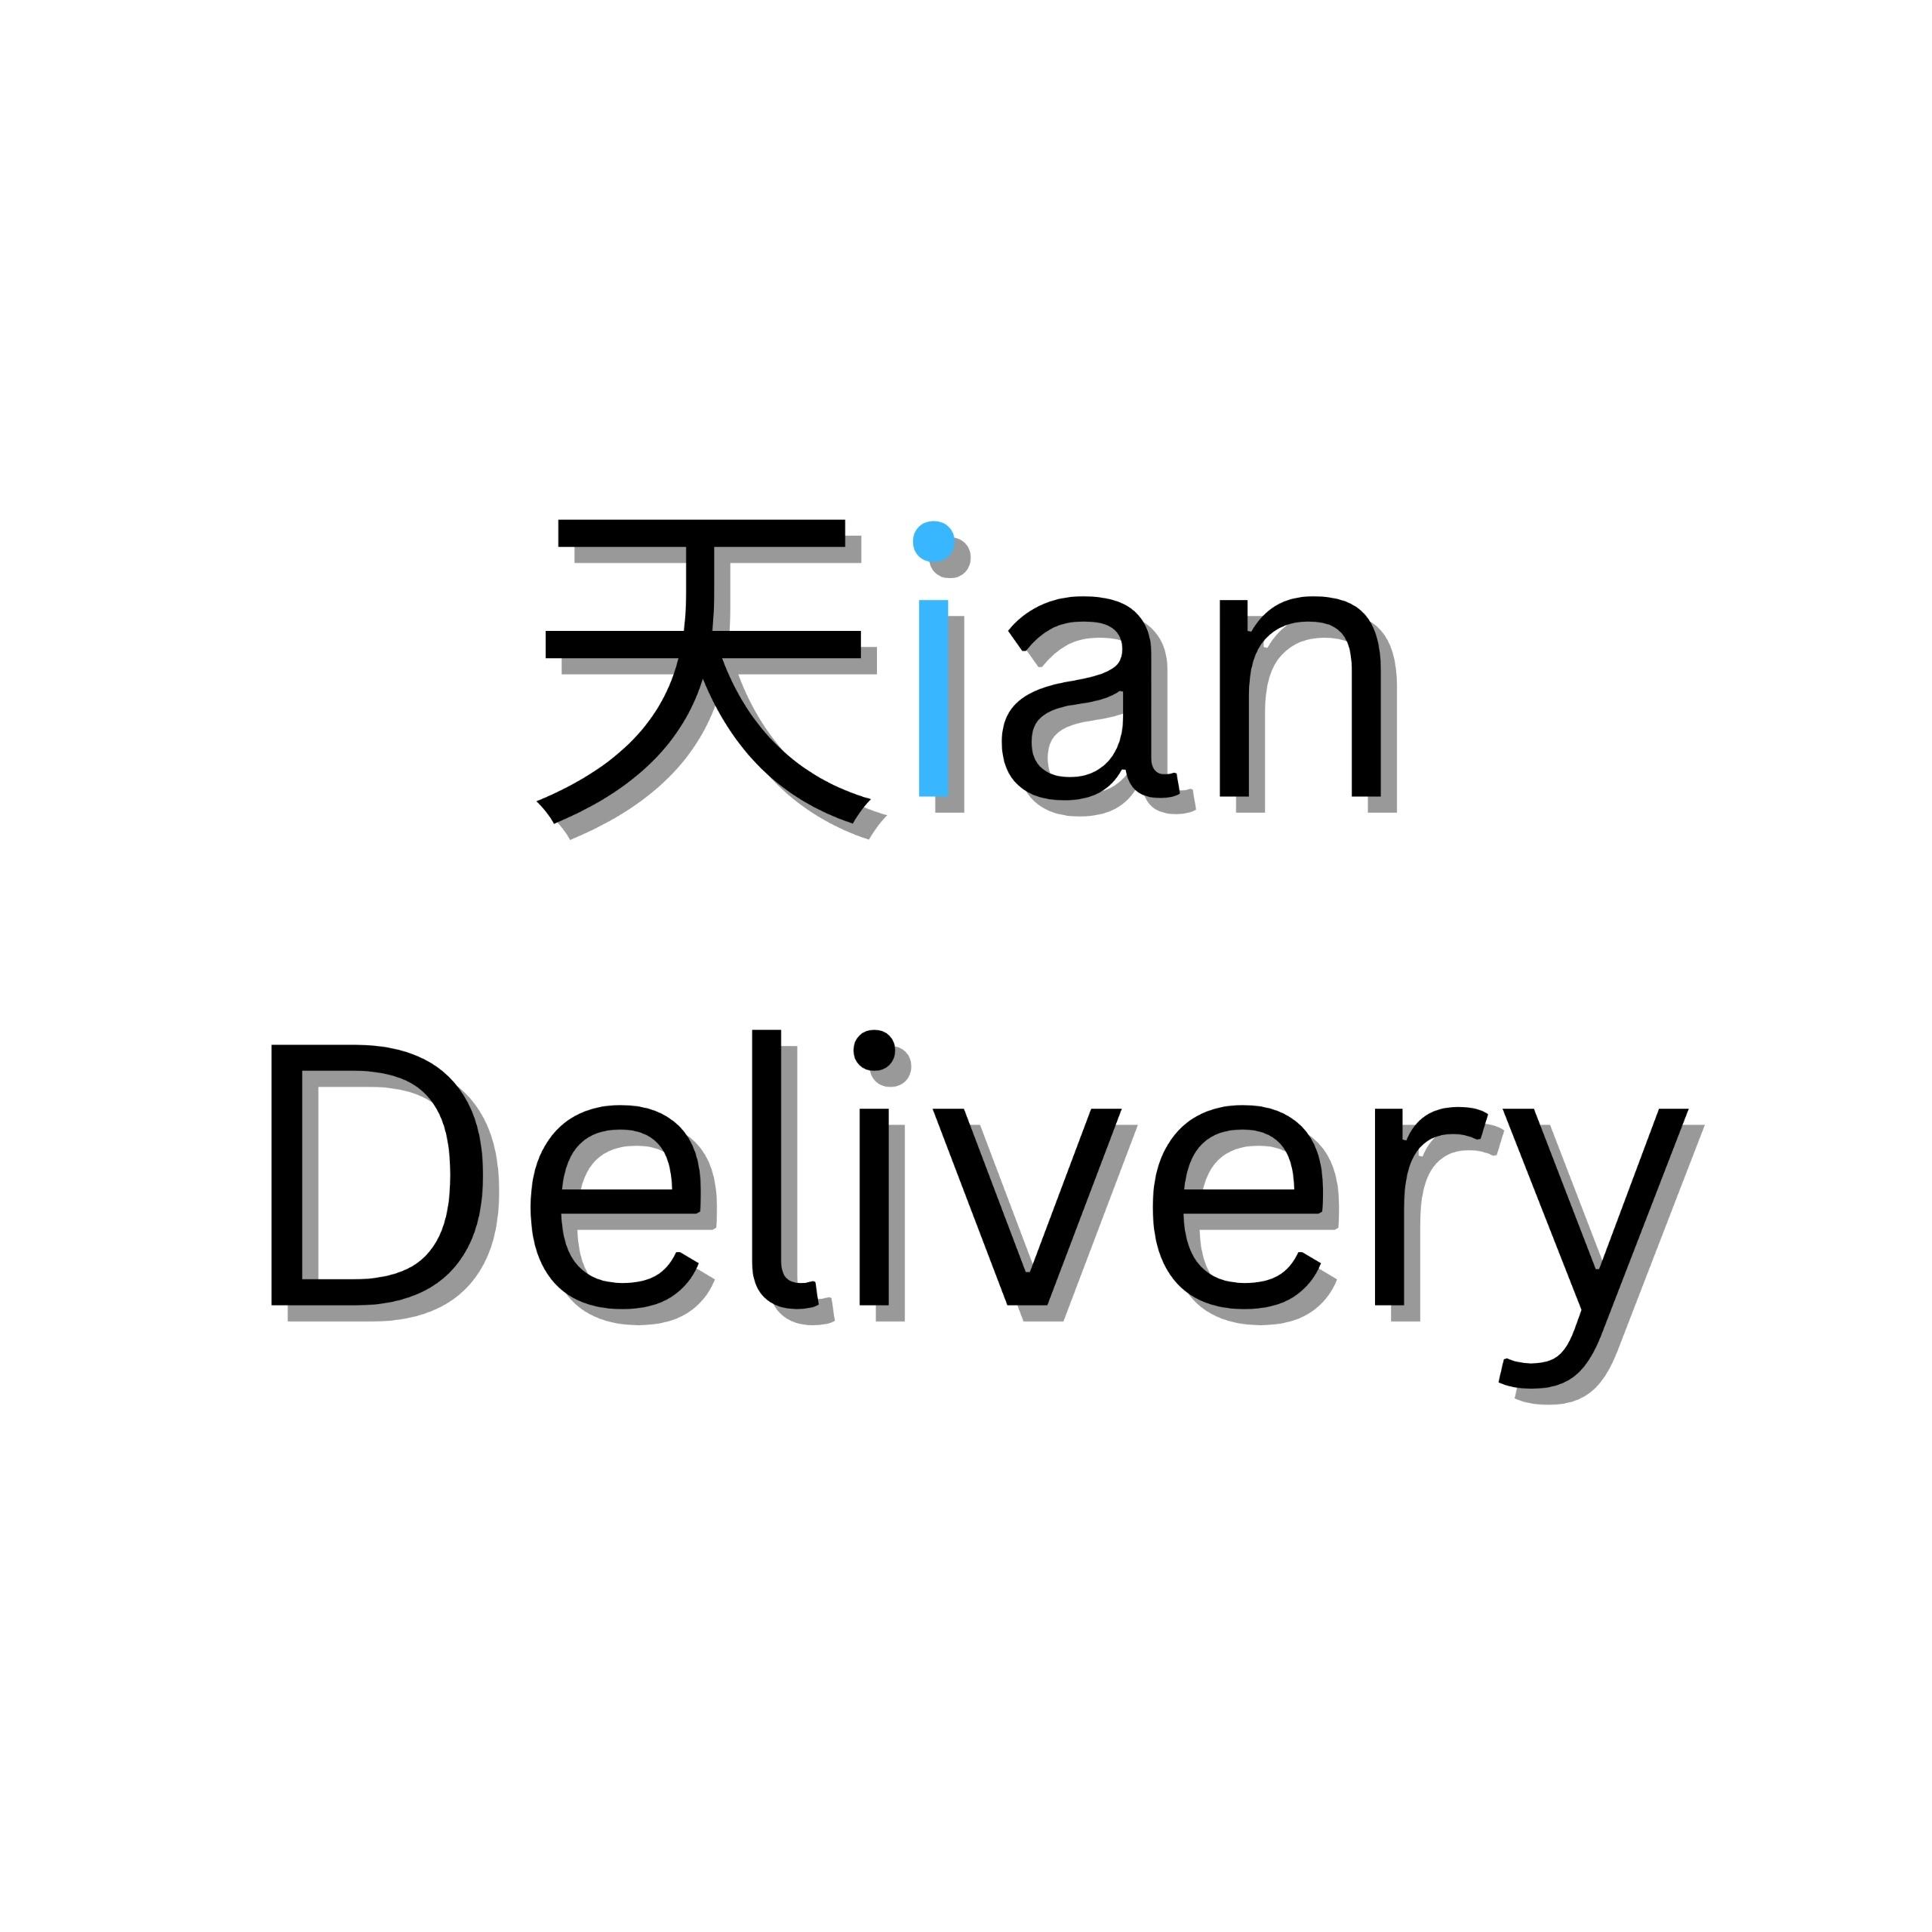 Tian Delivery's images